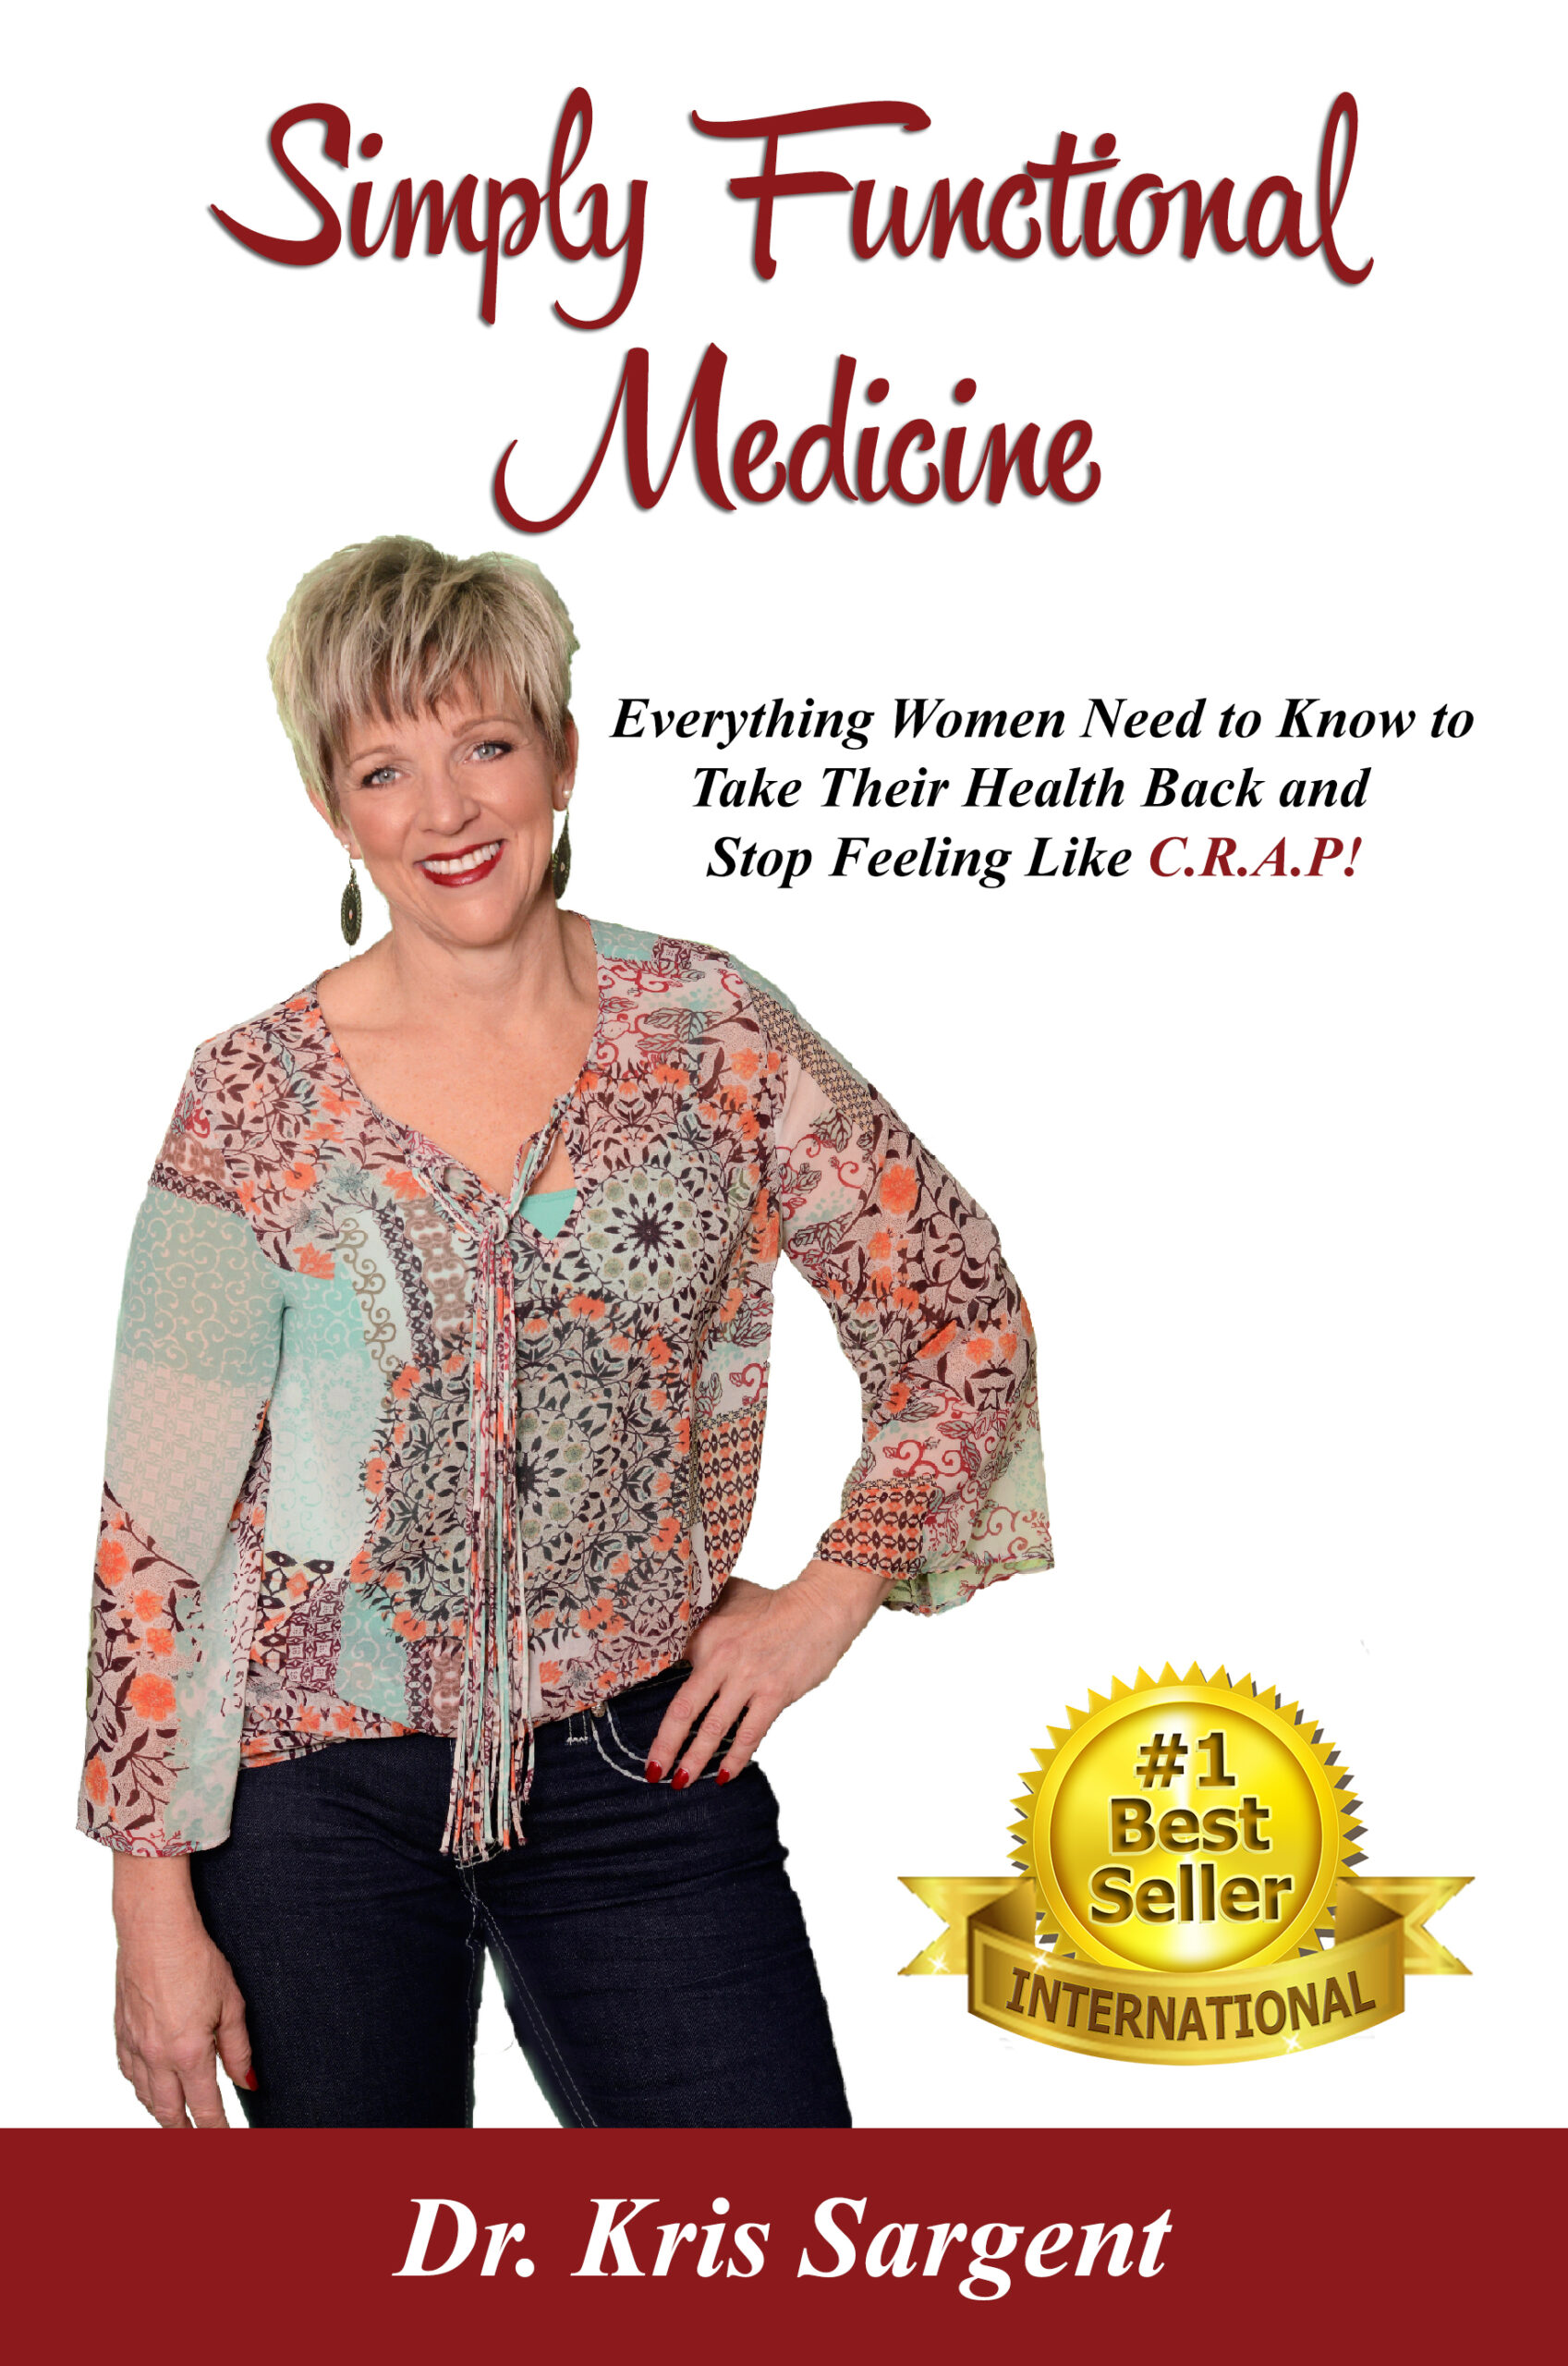 Cover of the book "Simply Functional Medicine" by Dr. Kris Sargent, featuring a photo of the author wearing a patterned blouse and jeans. The cover highlights "International #1 Best Seller." Dr. Kris's expertise in functional medicine shines through in every page.